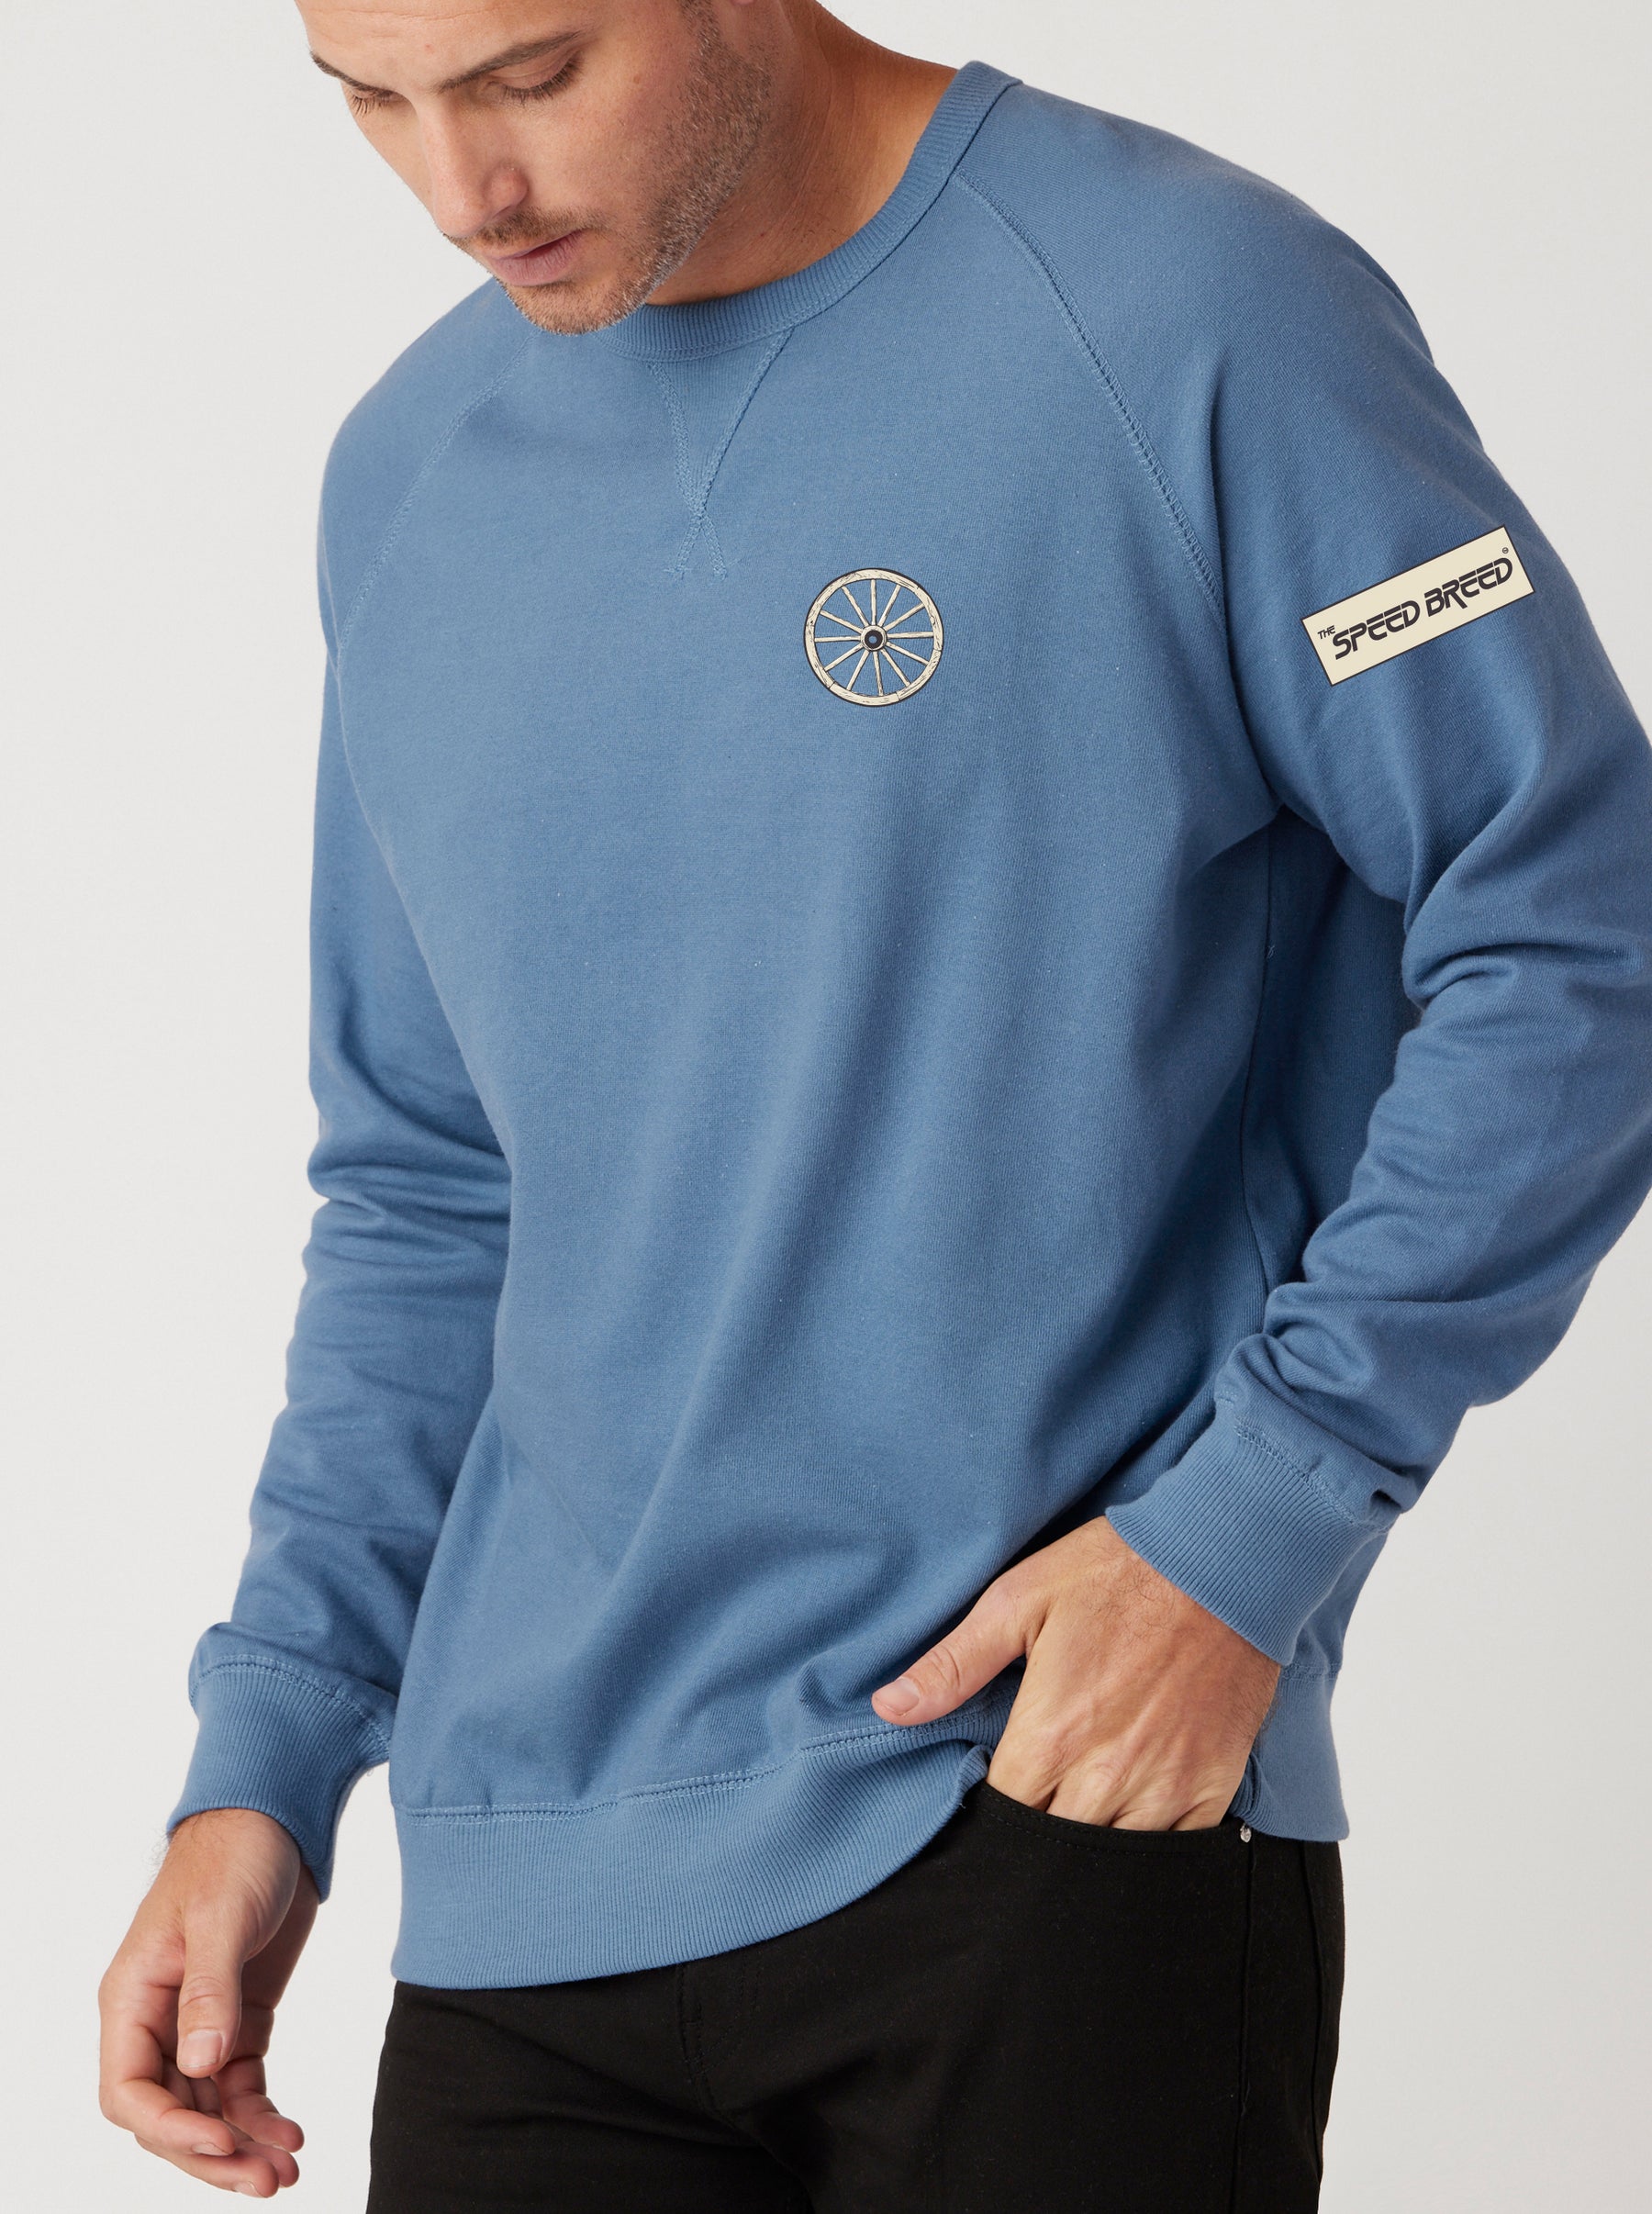 CHARIOTS EMBROIDERED UNISEX FRENCH TERRY CREW NECK SWEATER (Slate Blue)